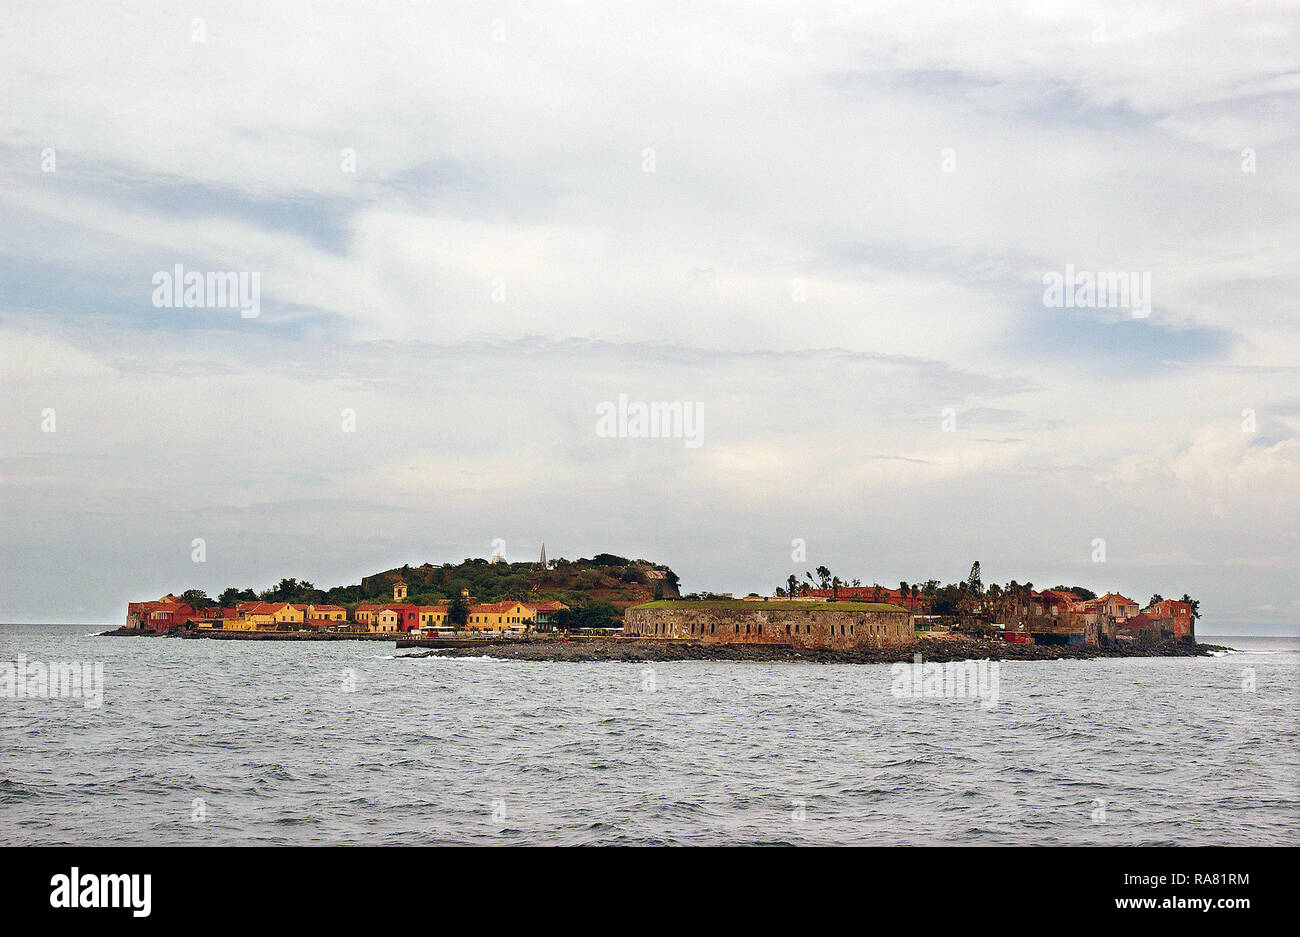 Goree Island, Senegal, located off the Western African  coast, was where slaves were taken after being captured to be put on ships bound for Cuba, Brazil, and the United States. Photograph taken during Joint Task Force Liberia. Stock Photo